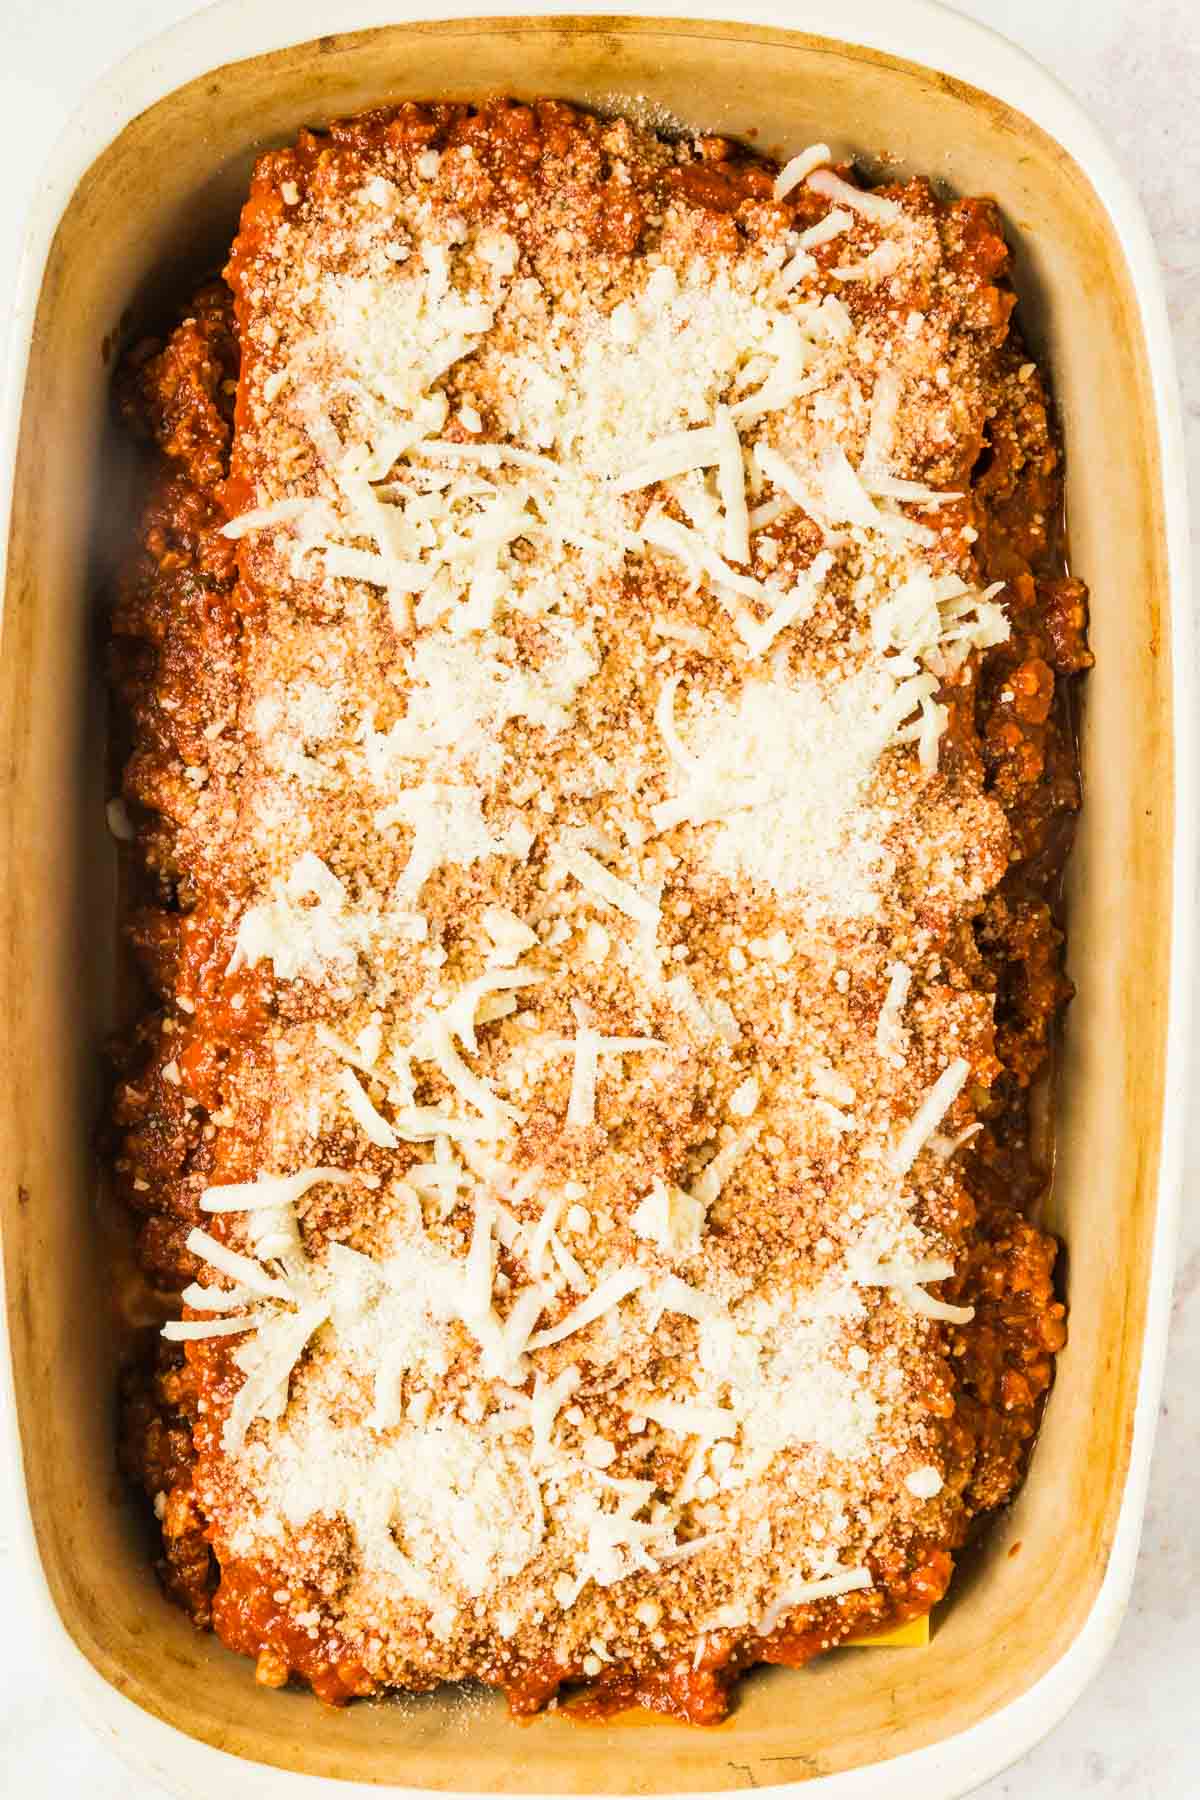 A fully assembled but unbaked gluten free lasagna in a baking pan topped with mozzarella and parmesan cheese.